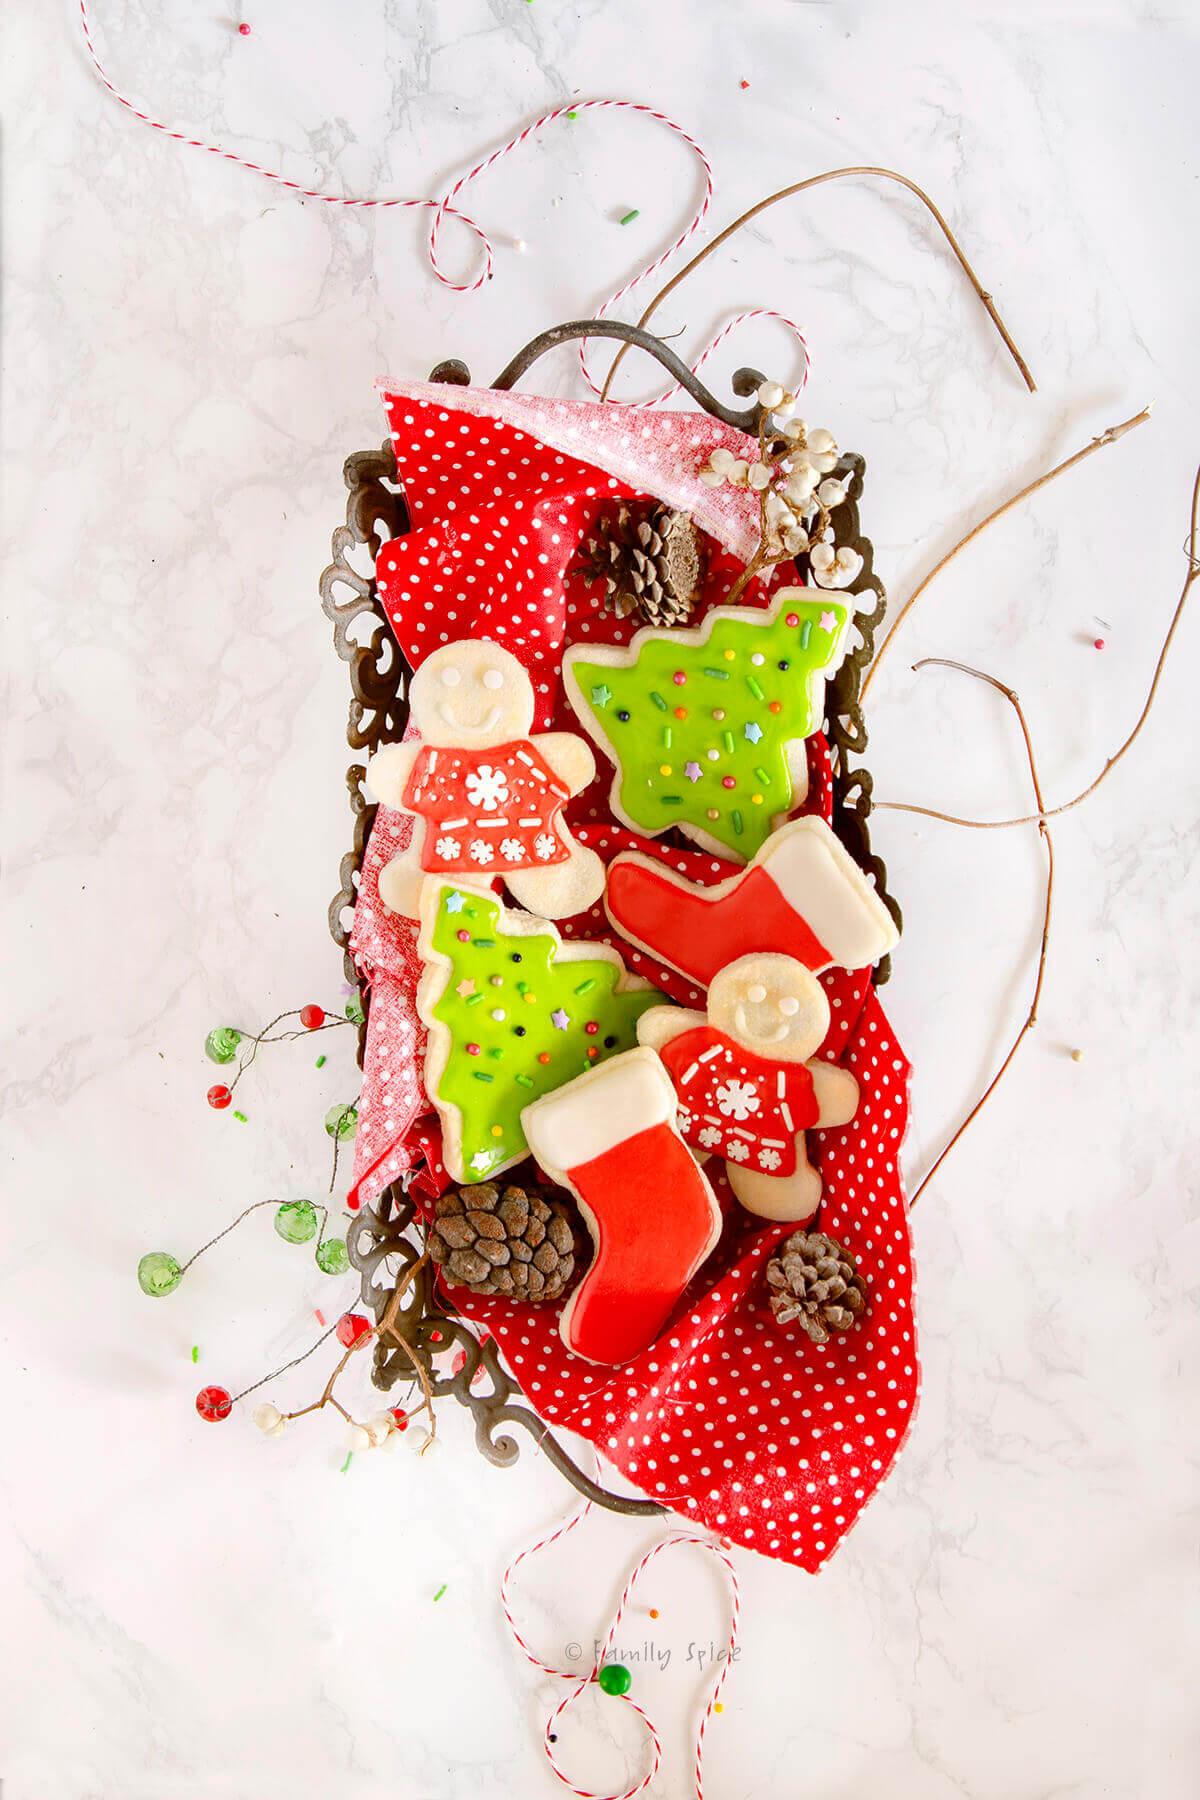 A metal tray with decorated Christmas sugar cookies in it